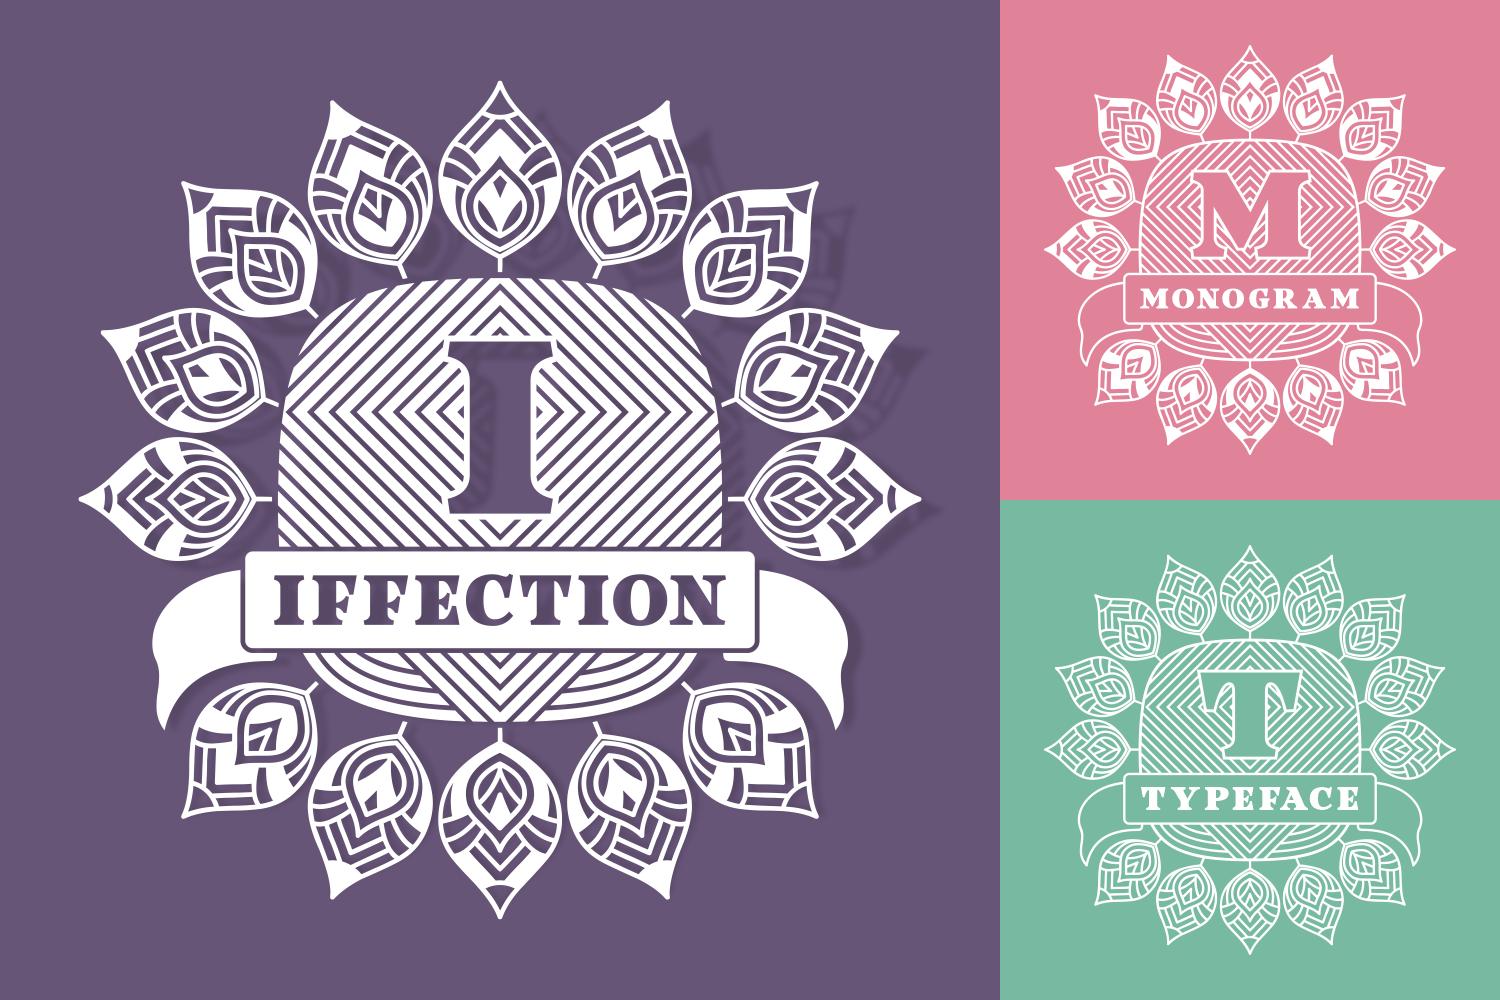 Iffection Font